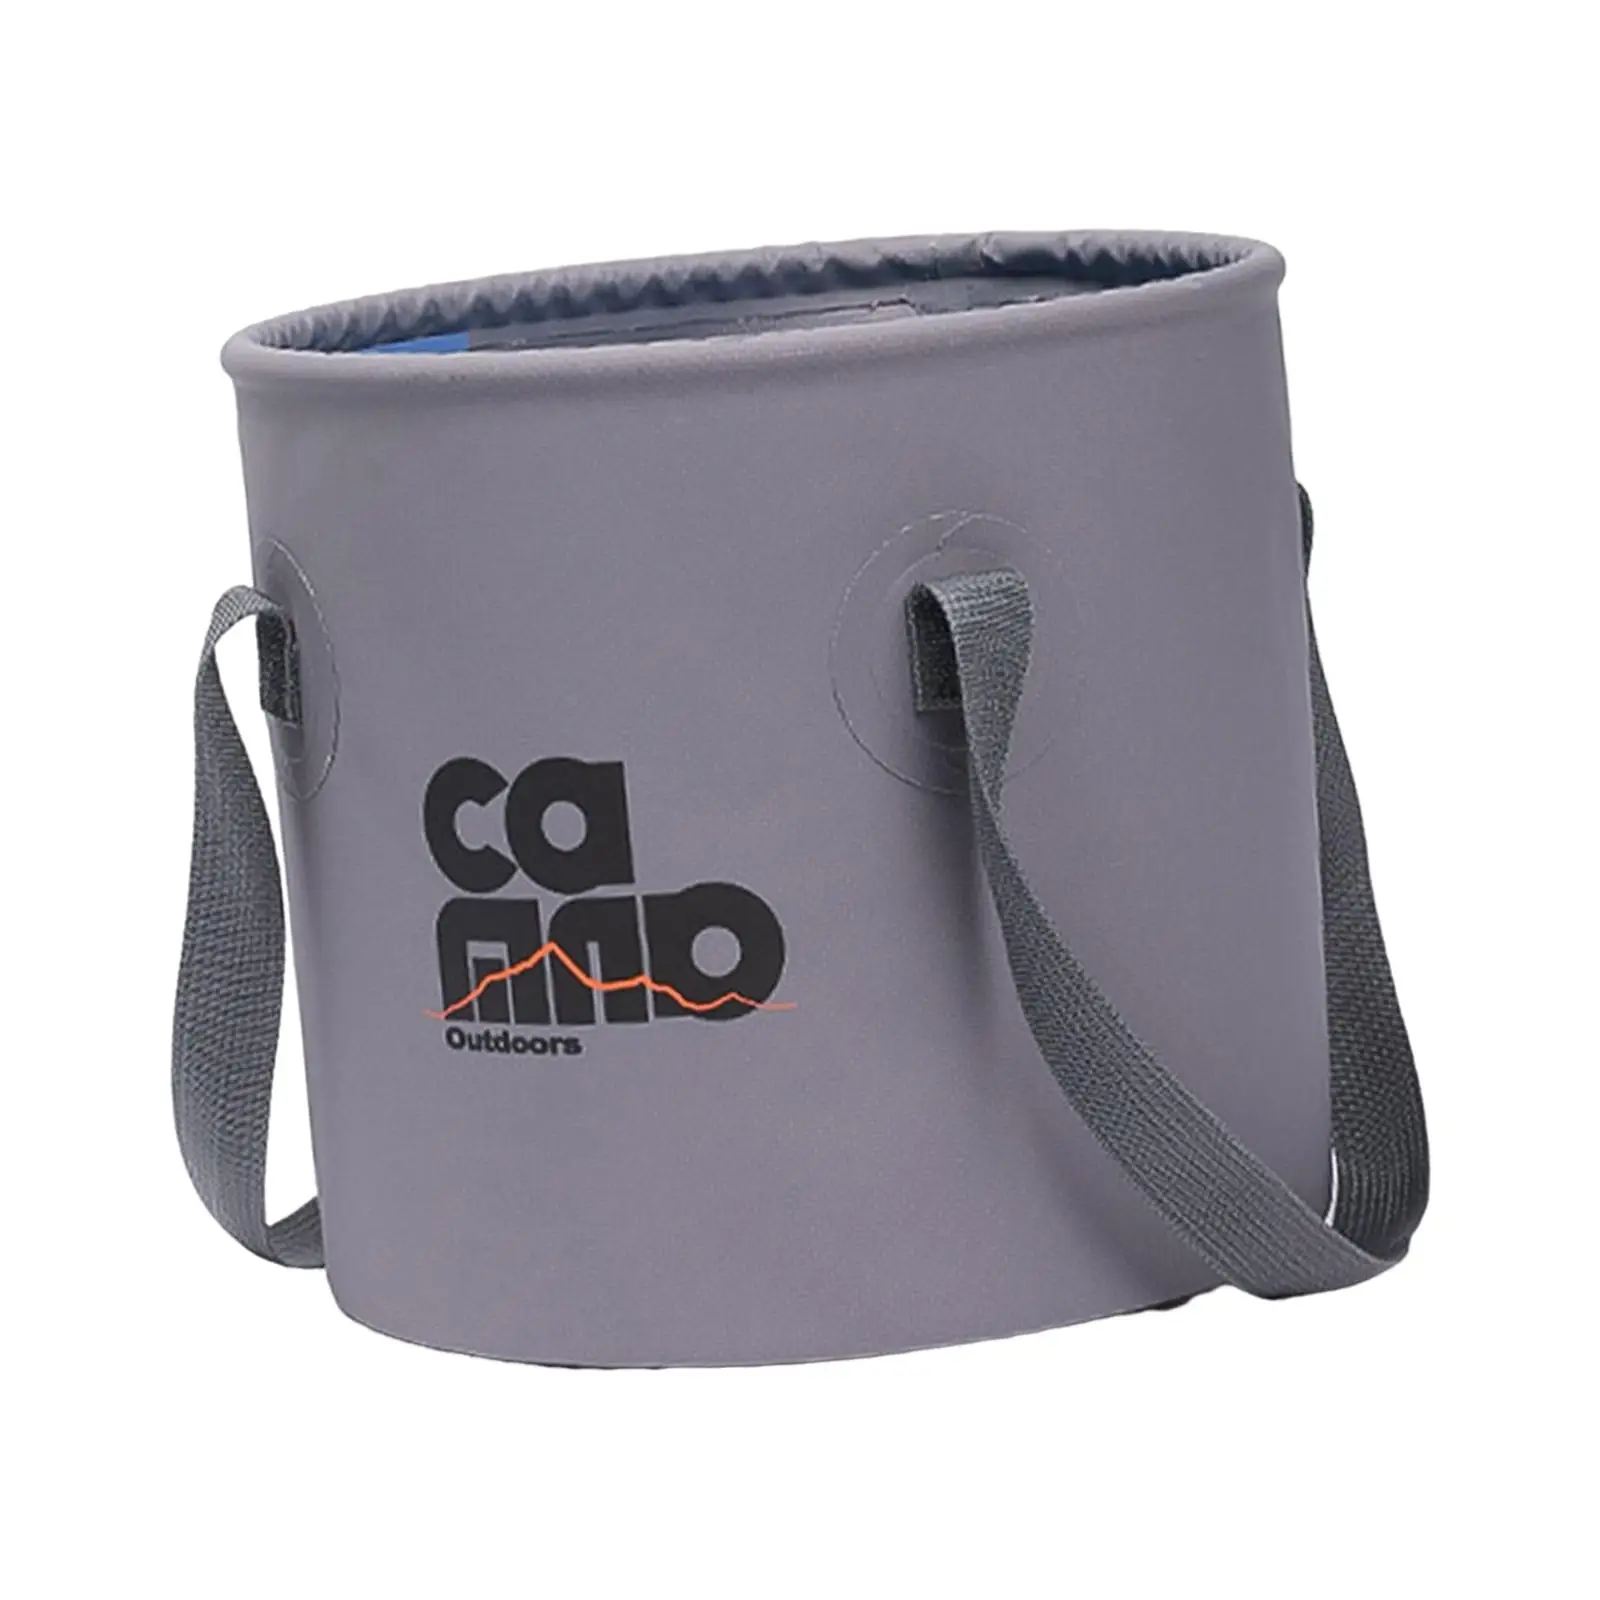 Collapsible bucket, portable large capacity foldable water